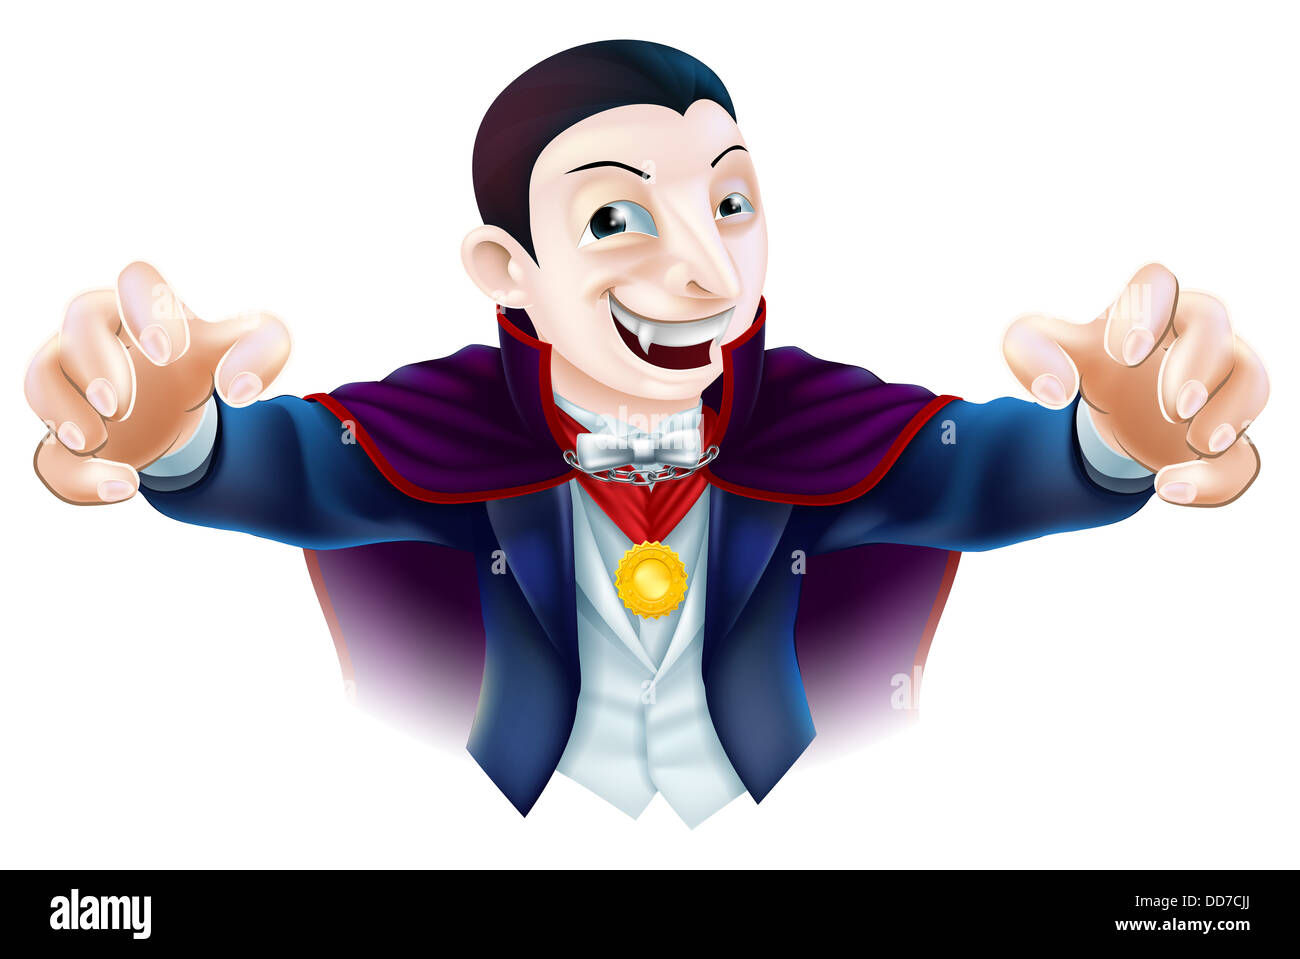 An illustration of a cute cartoon Count Dracula vampire character for Halloween Stock Photo